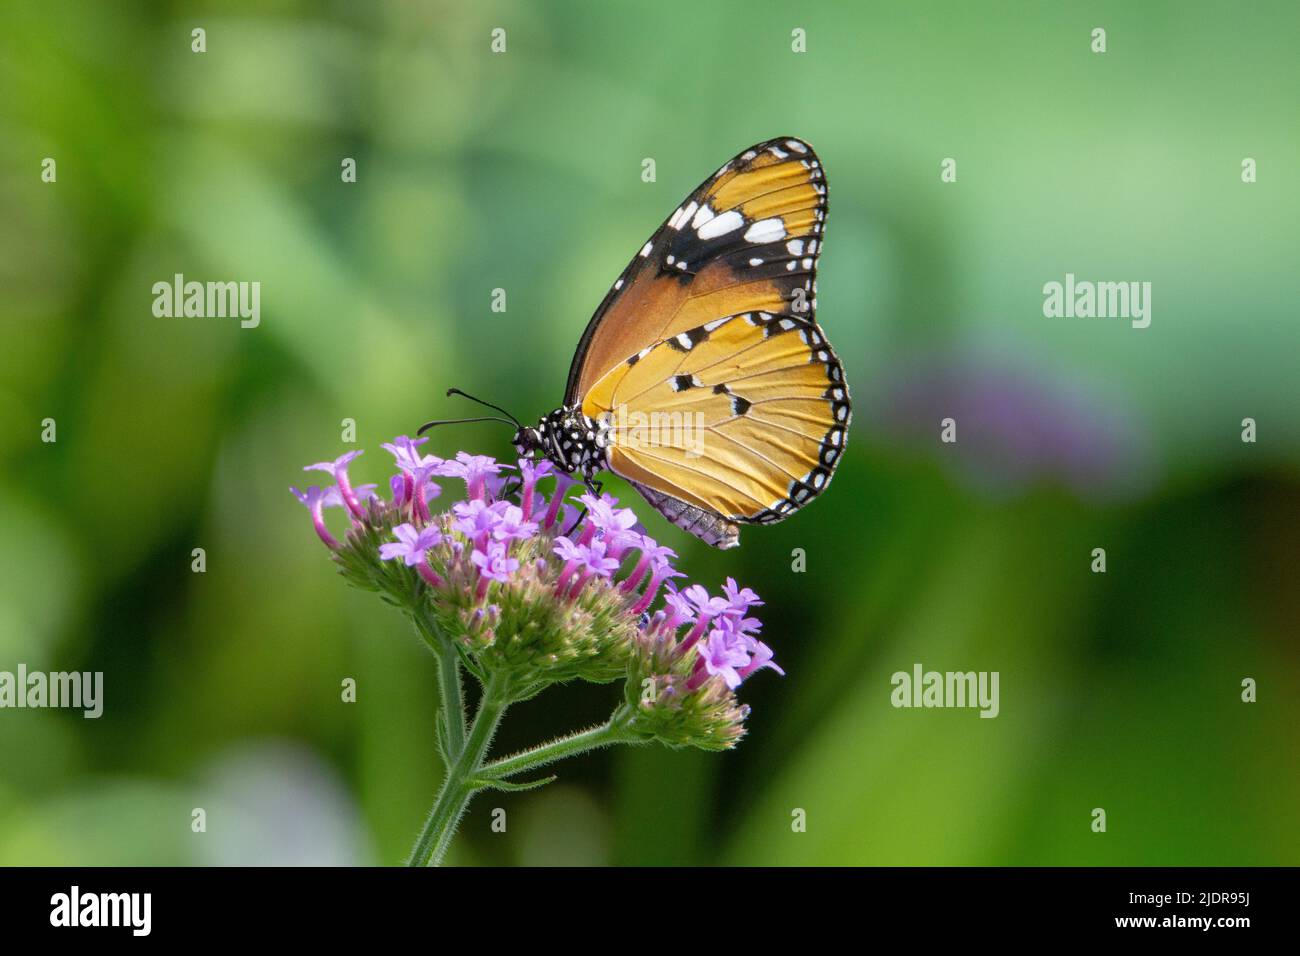 Plain Tiger butterfly (Danaus chrysippus chrysippus) with closed wings feeding from small purple flowers isolated tropical green in the background Stock Photo